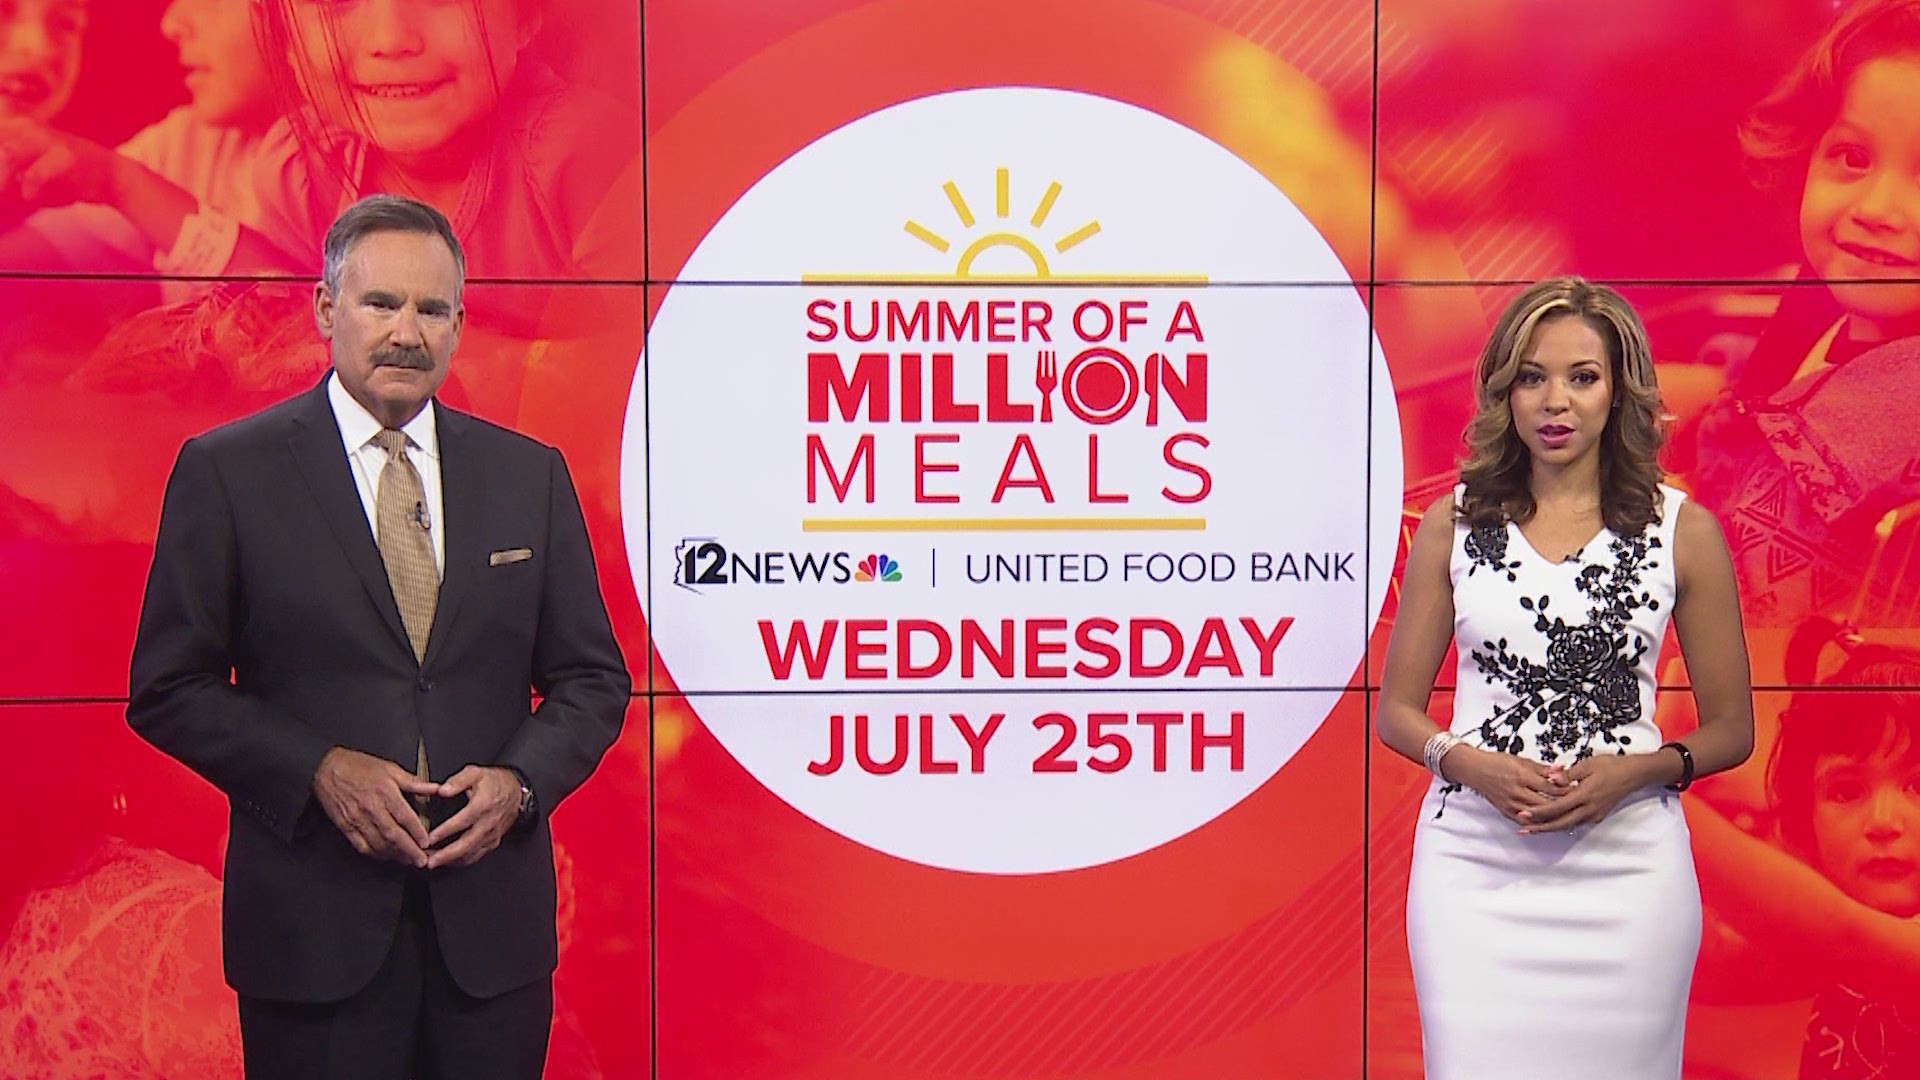 It's a Summer of a Million Meals! Call during our telethon on July 24 to make your donation!